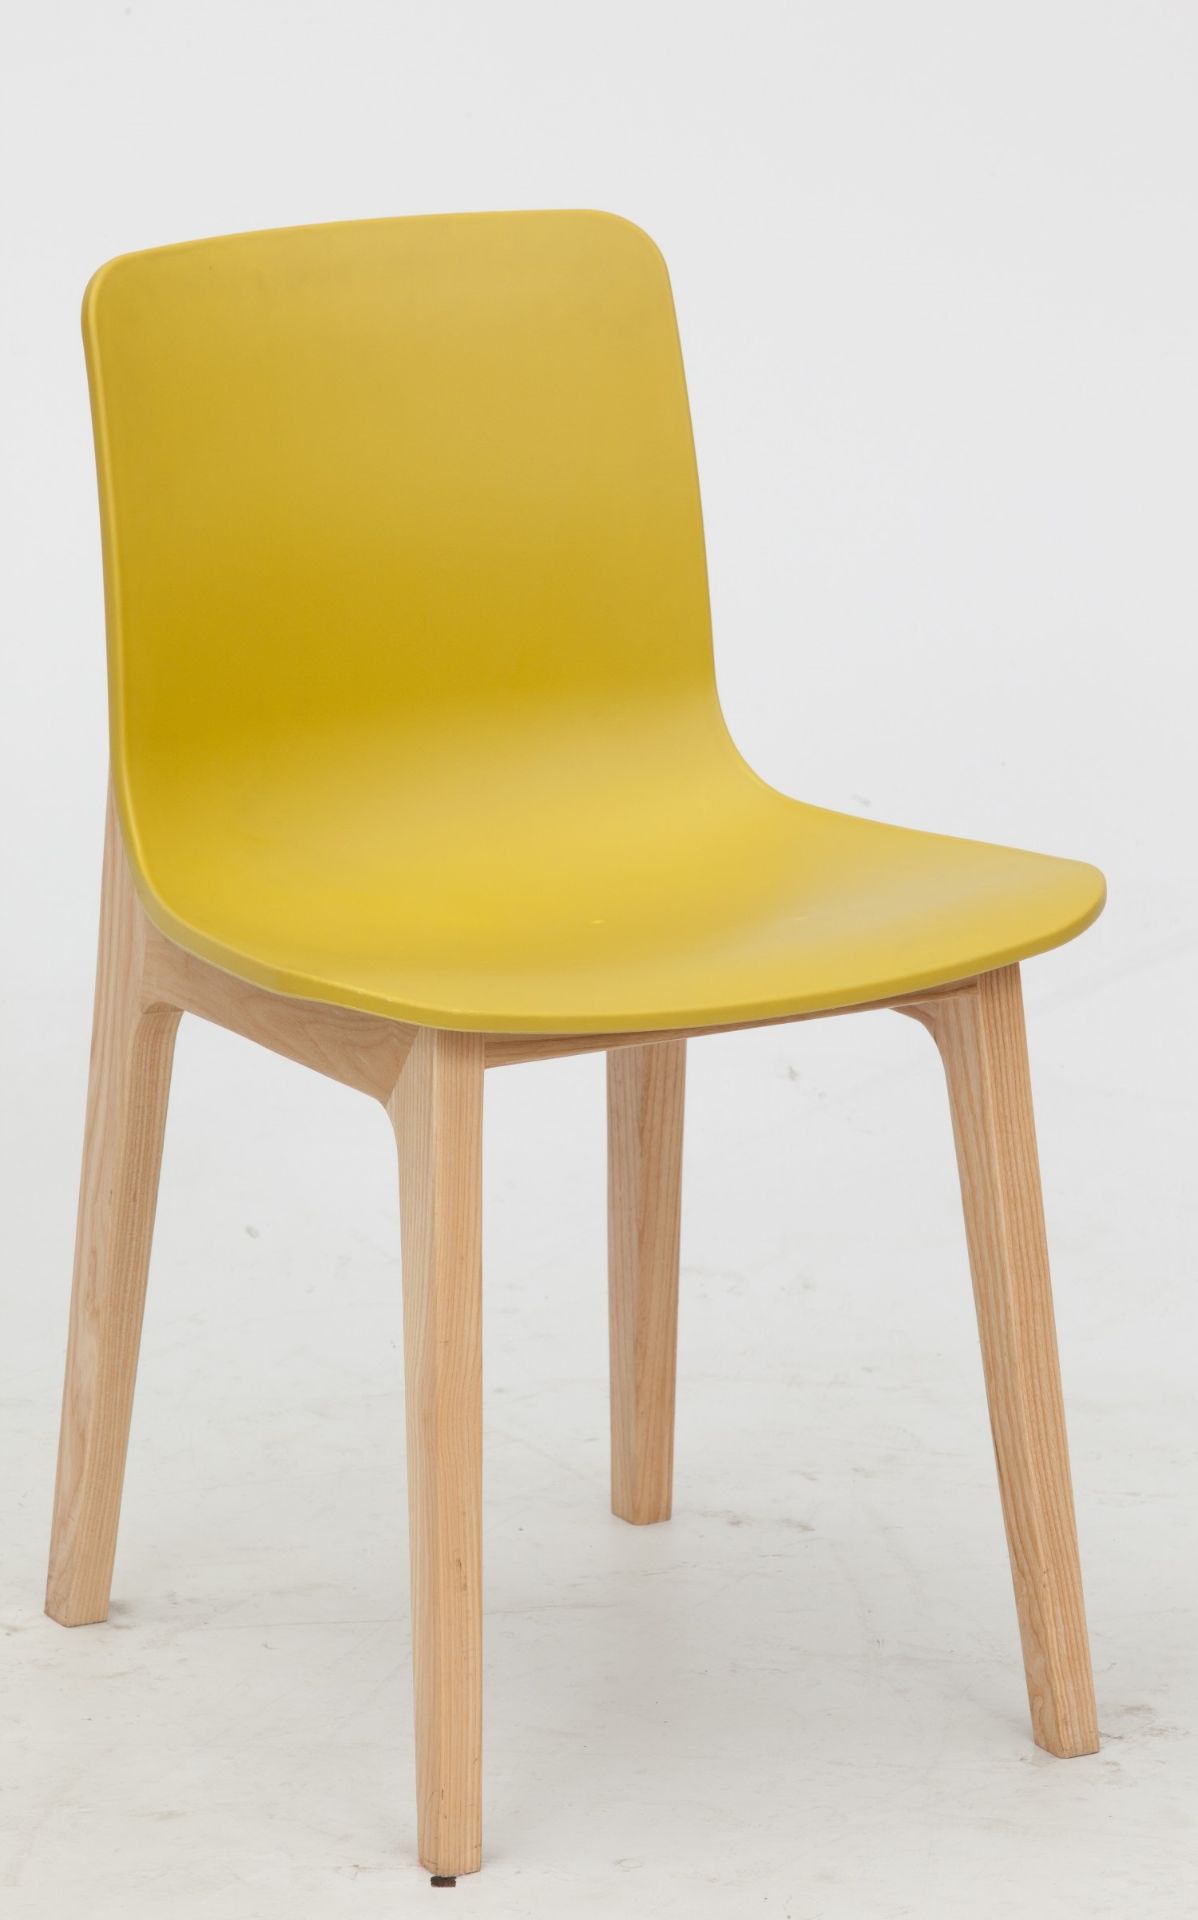 Set of 4 x Swift DC-782W Dining Chairs With Chartreuse Yellow ABS Seats and Dark Wood Bases - Image 2 of 3